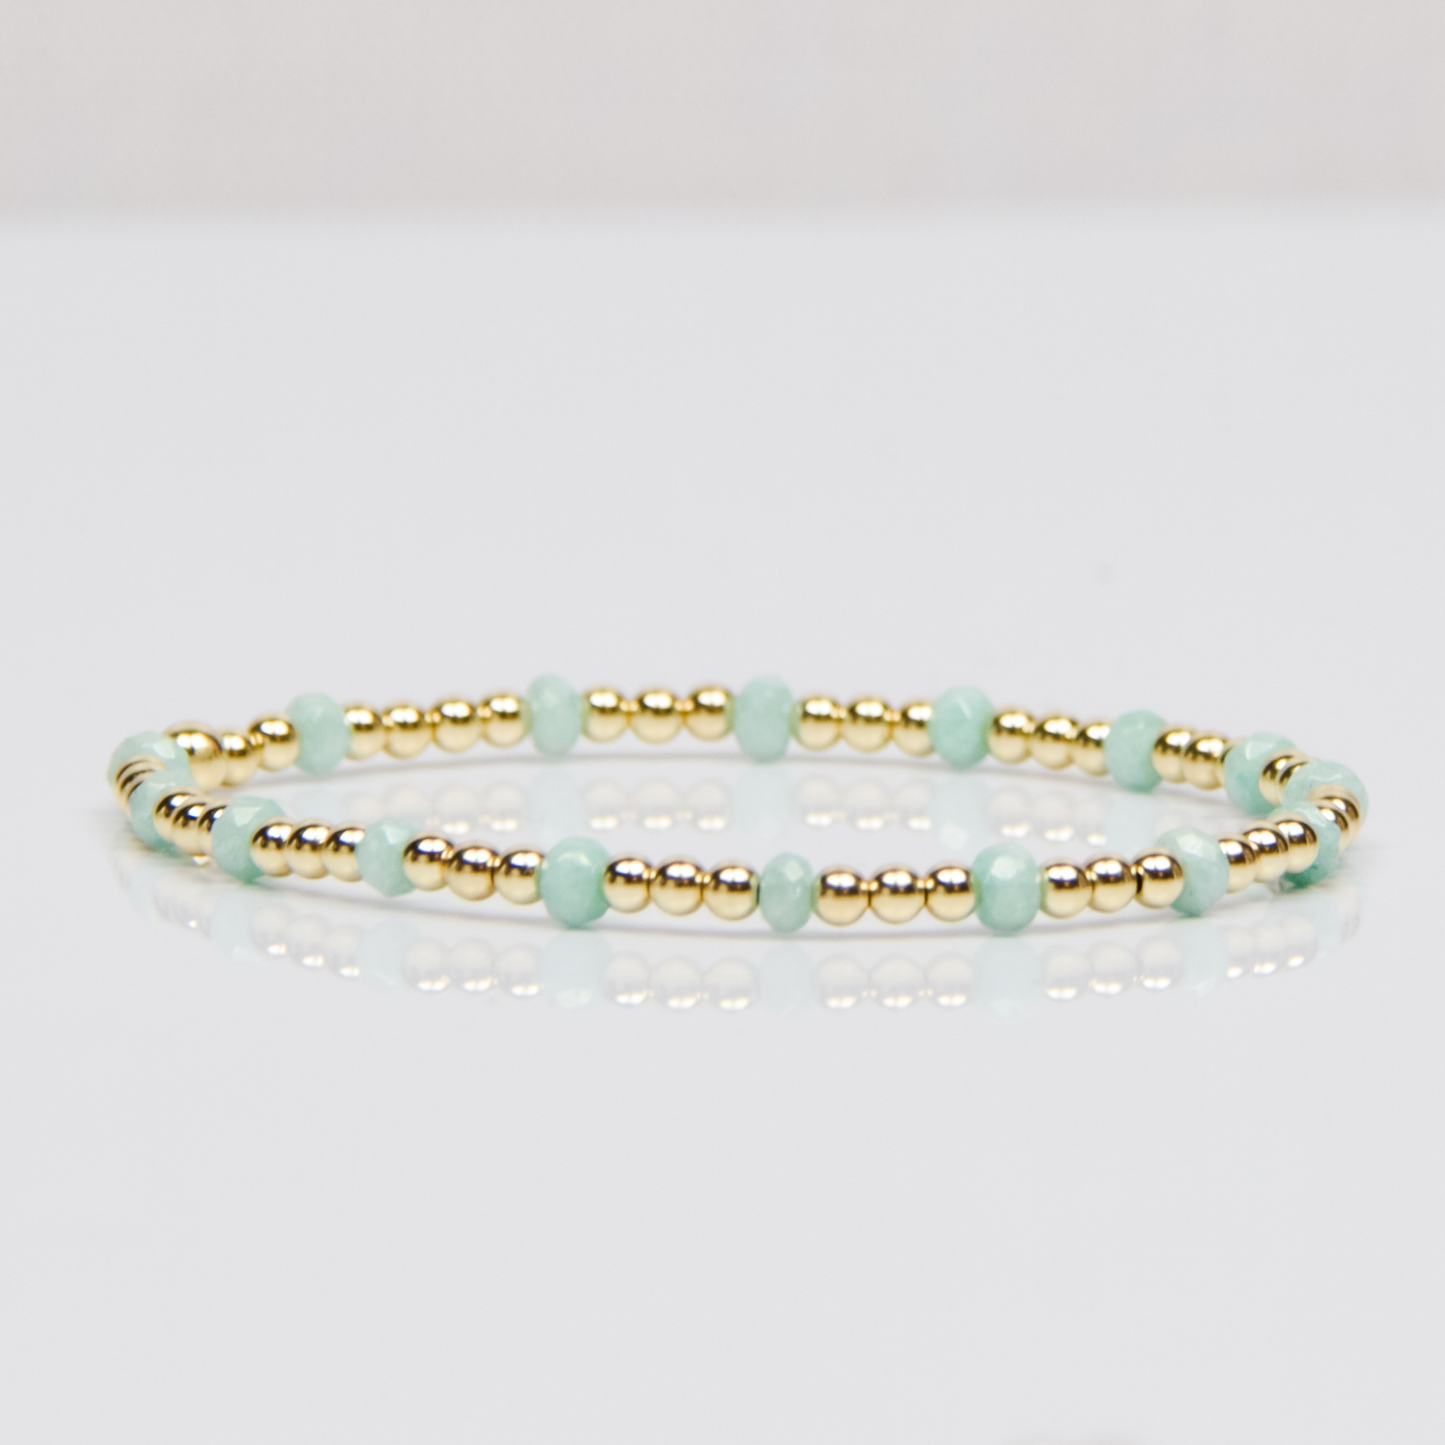 Cultivated Bracelet